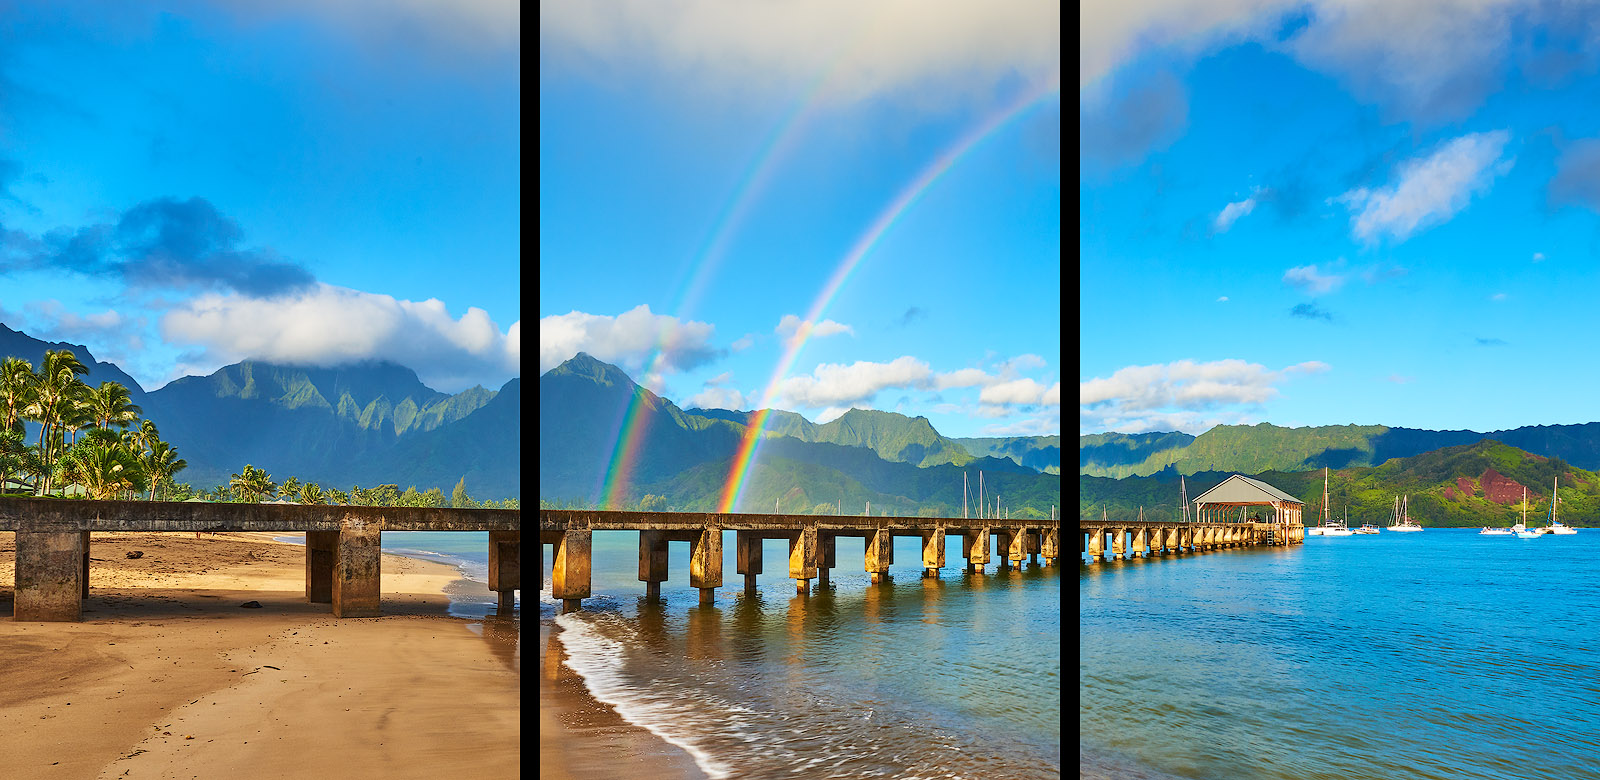 the beautiful Hanalei Bay Pier in the morning with a double rainbow over the pier and the lush towering mountains of Hanalei Kauai in the background